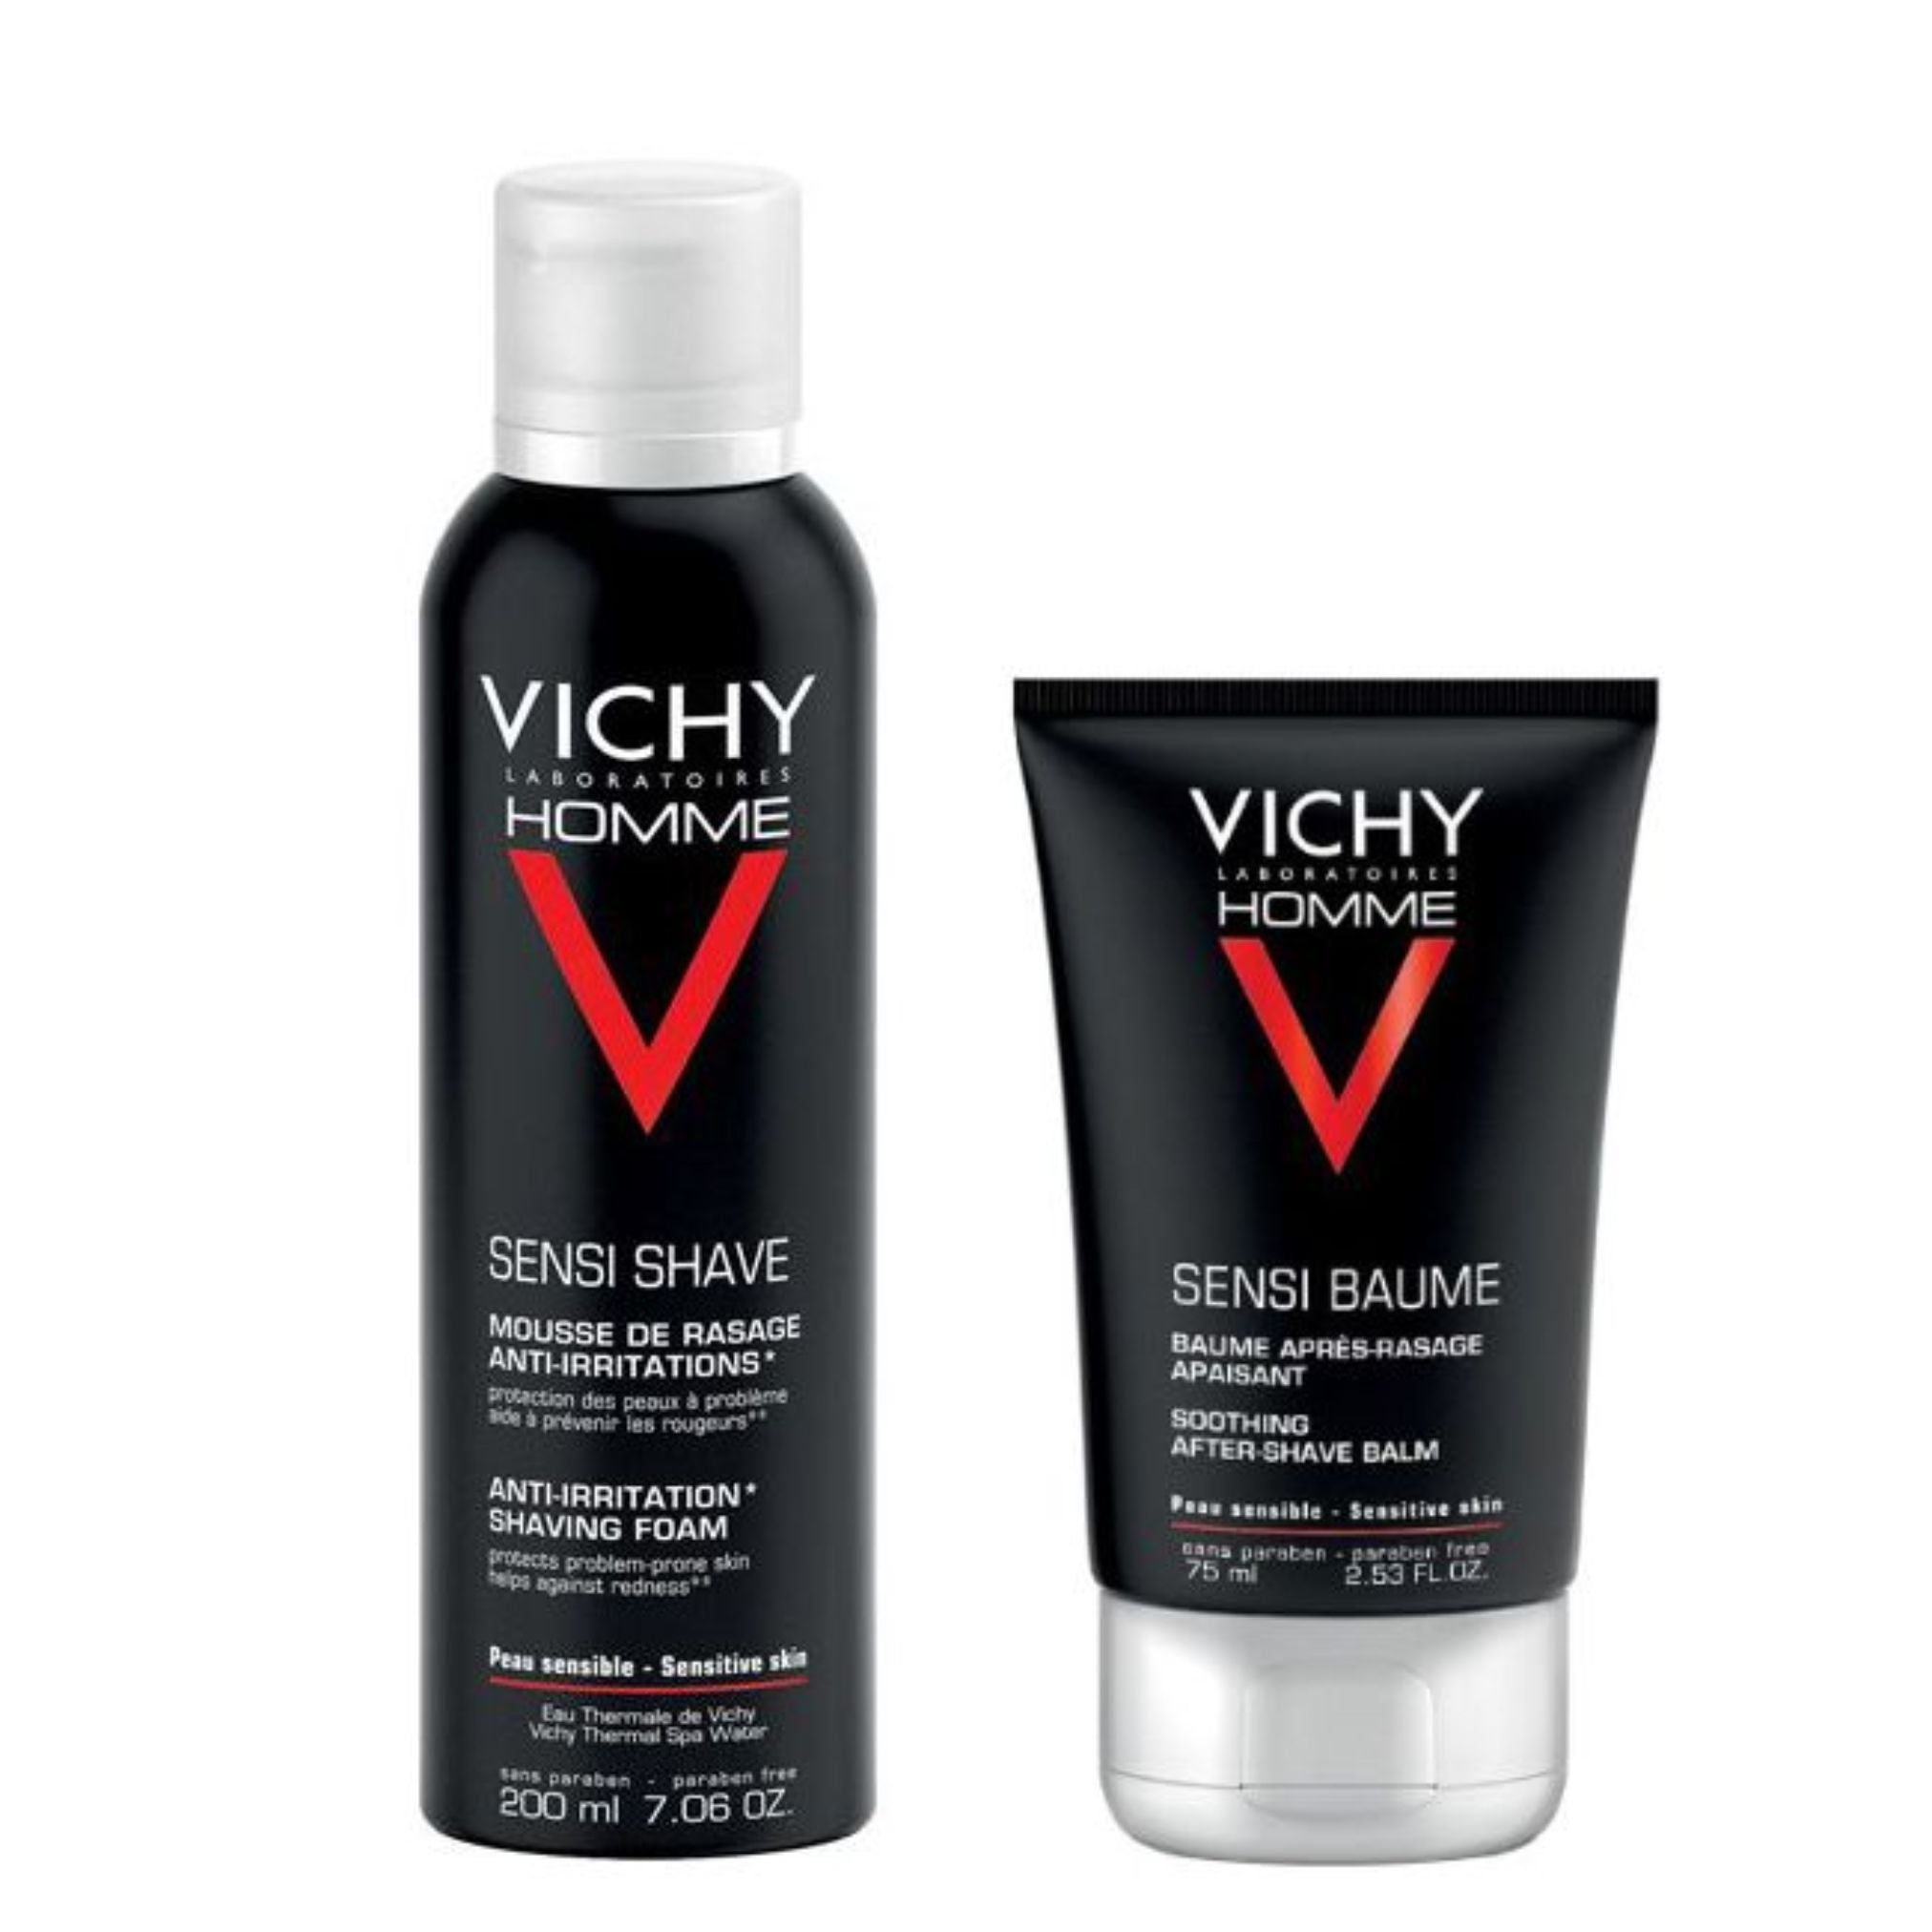 Vichy Promo Pack: Vichy Homme Anti-Irritation Shaving Foam 200ml + Vichy Homme Soothing After-Shave Balm 75ml